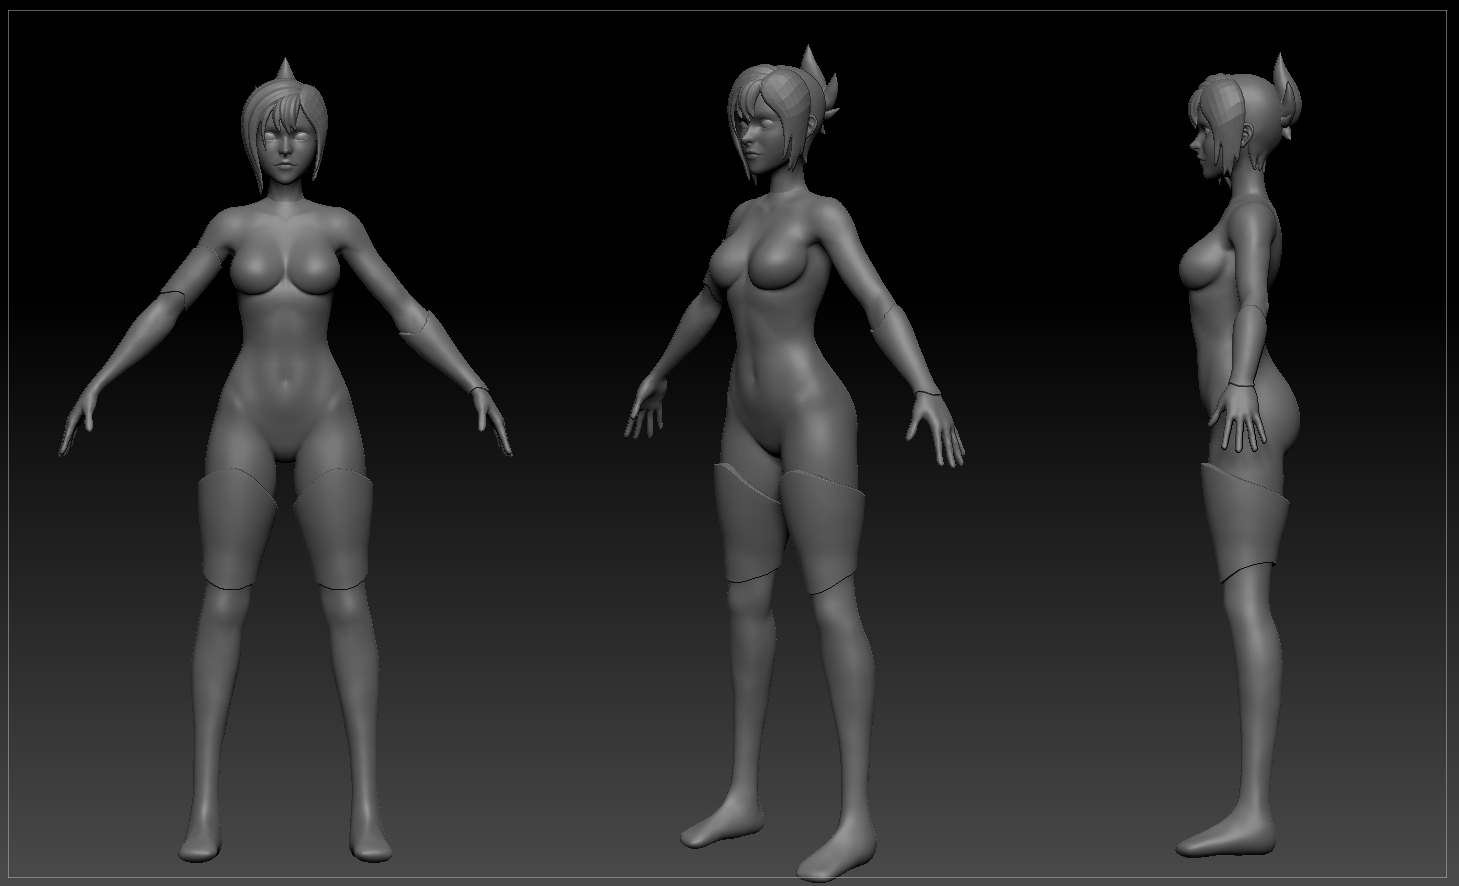 riven_wip2_by_zenith30000-d86sxy6.png